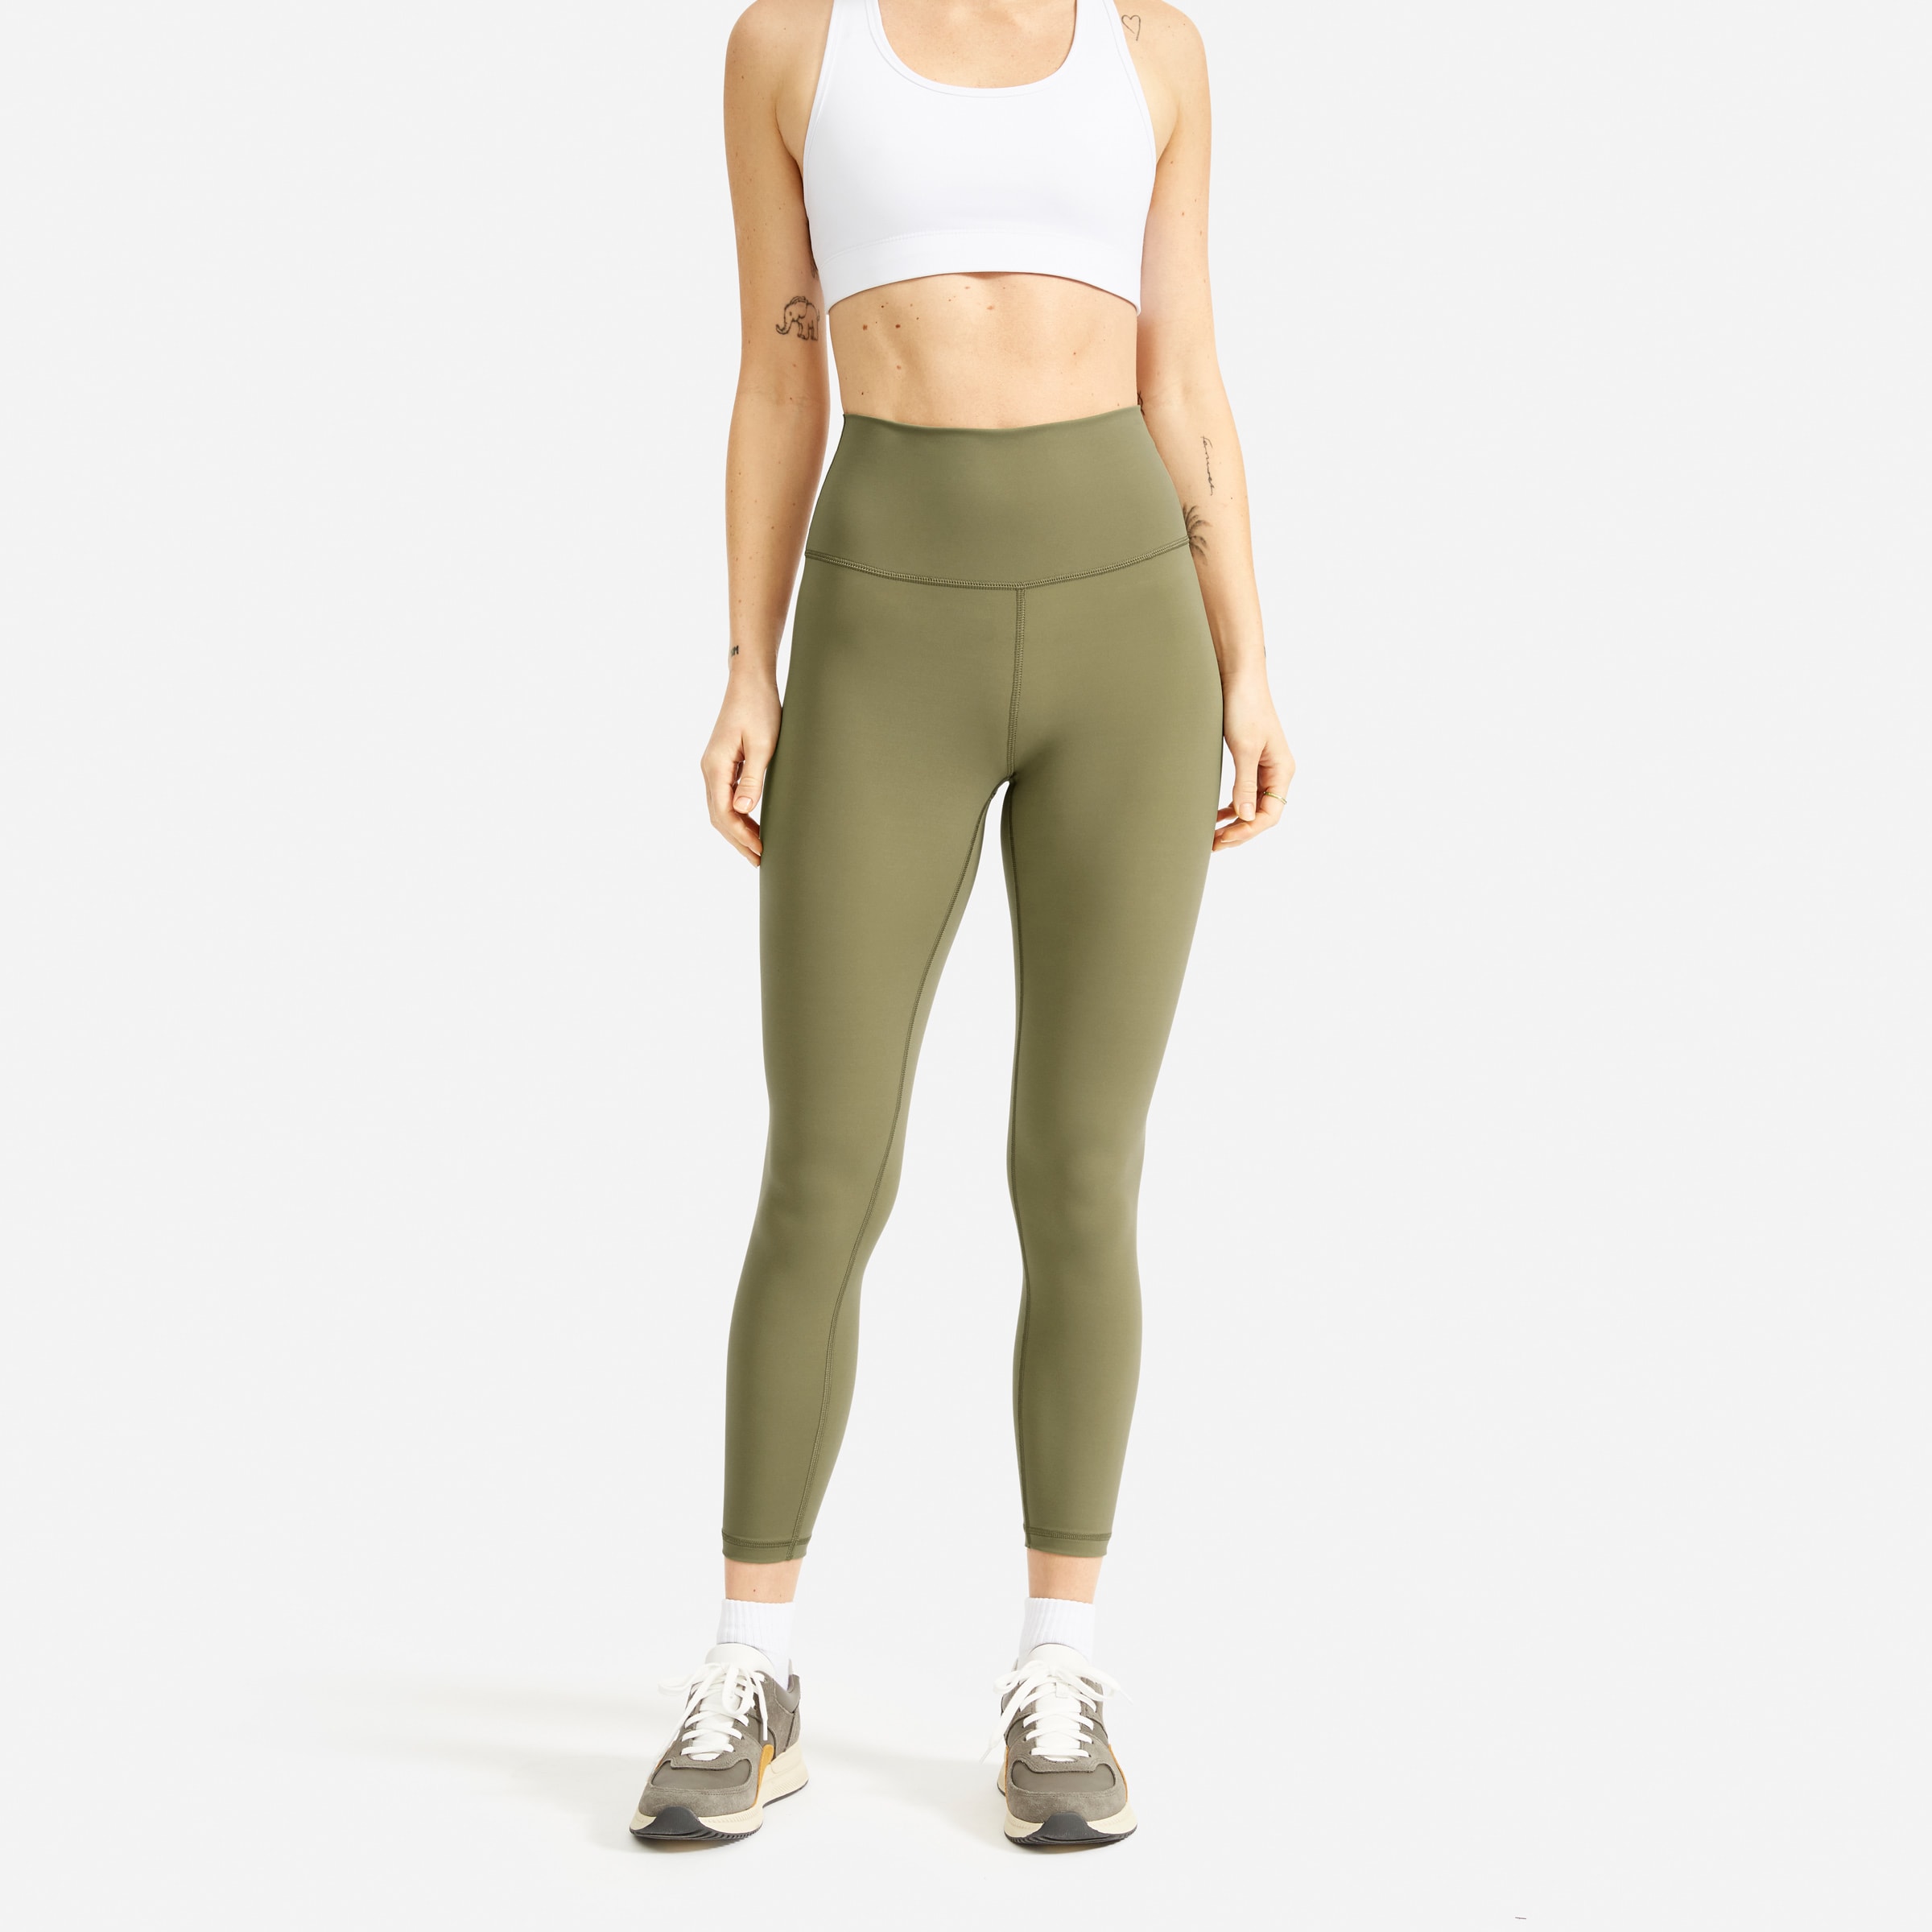 Everlane Leggings Are Now A Thing, And We Need Them AllHelloGiggles